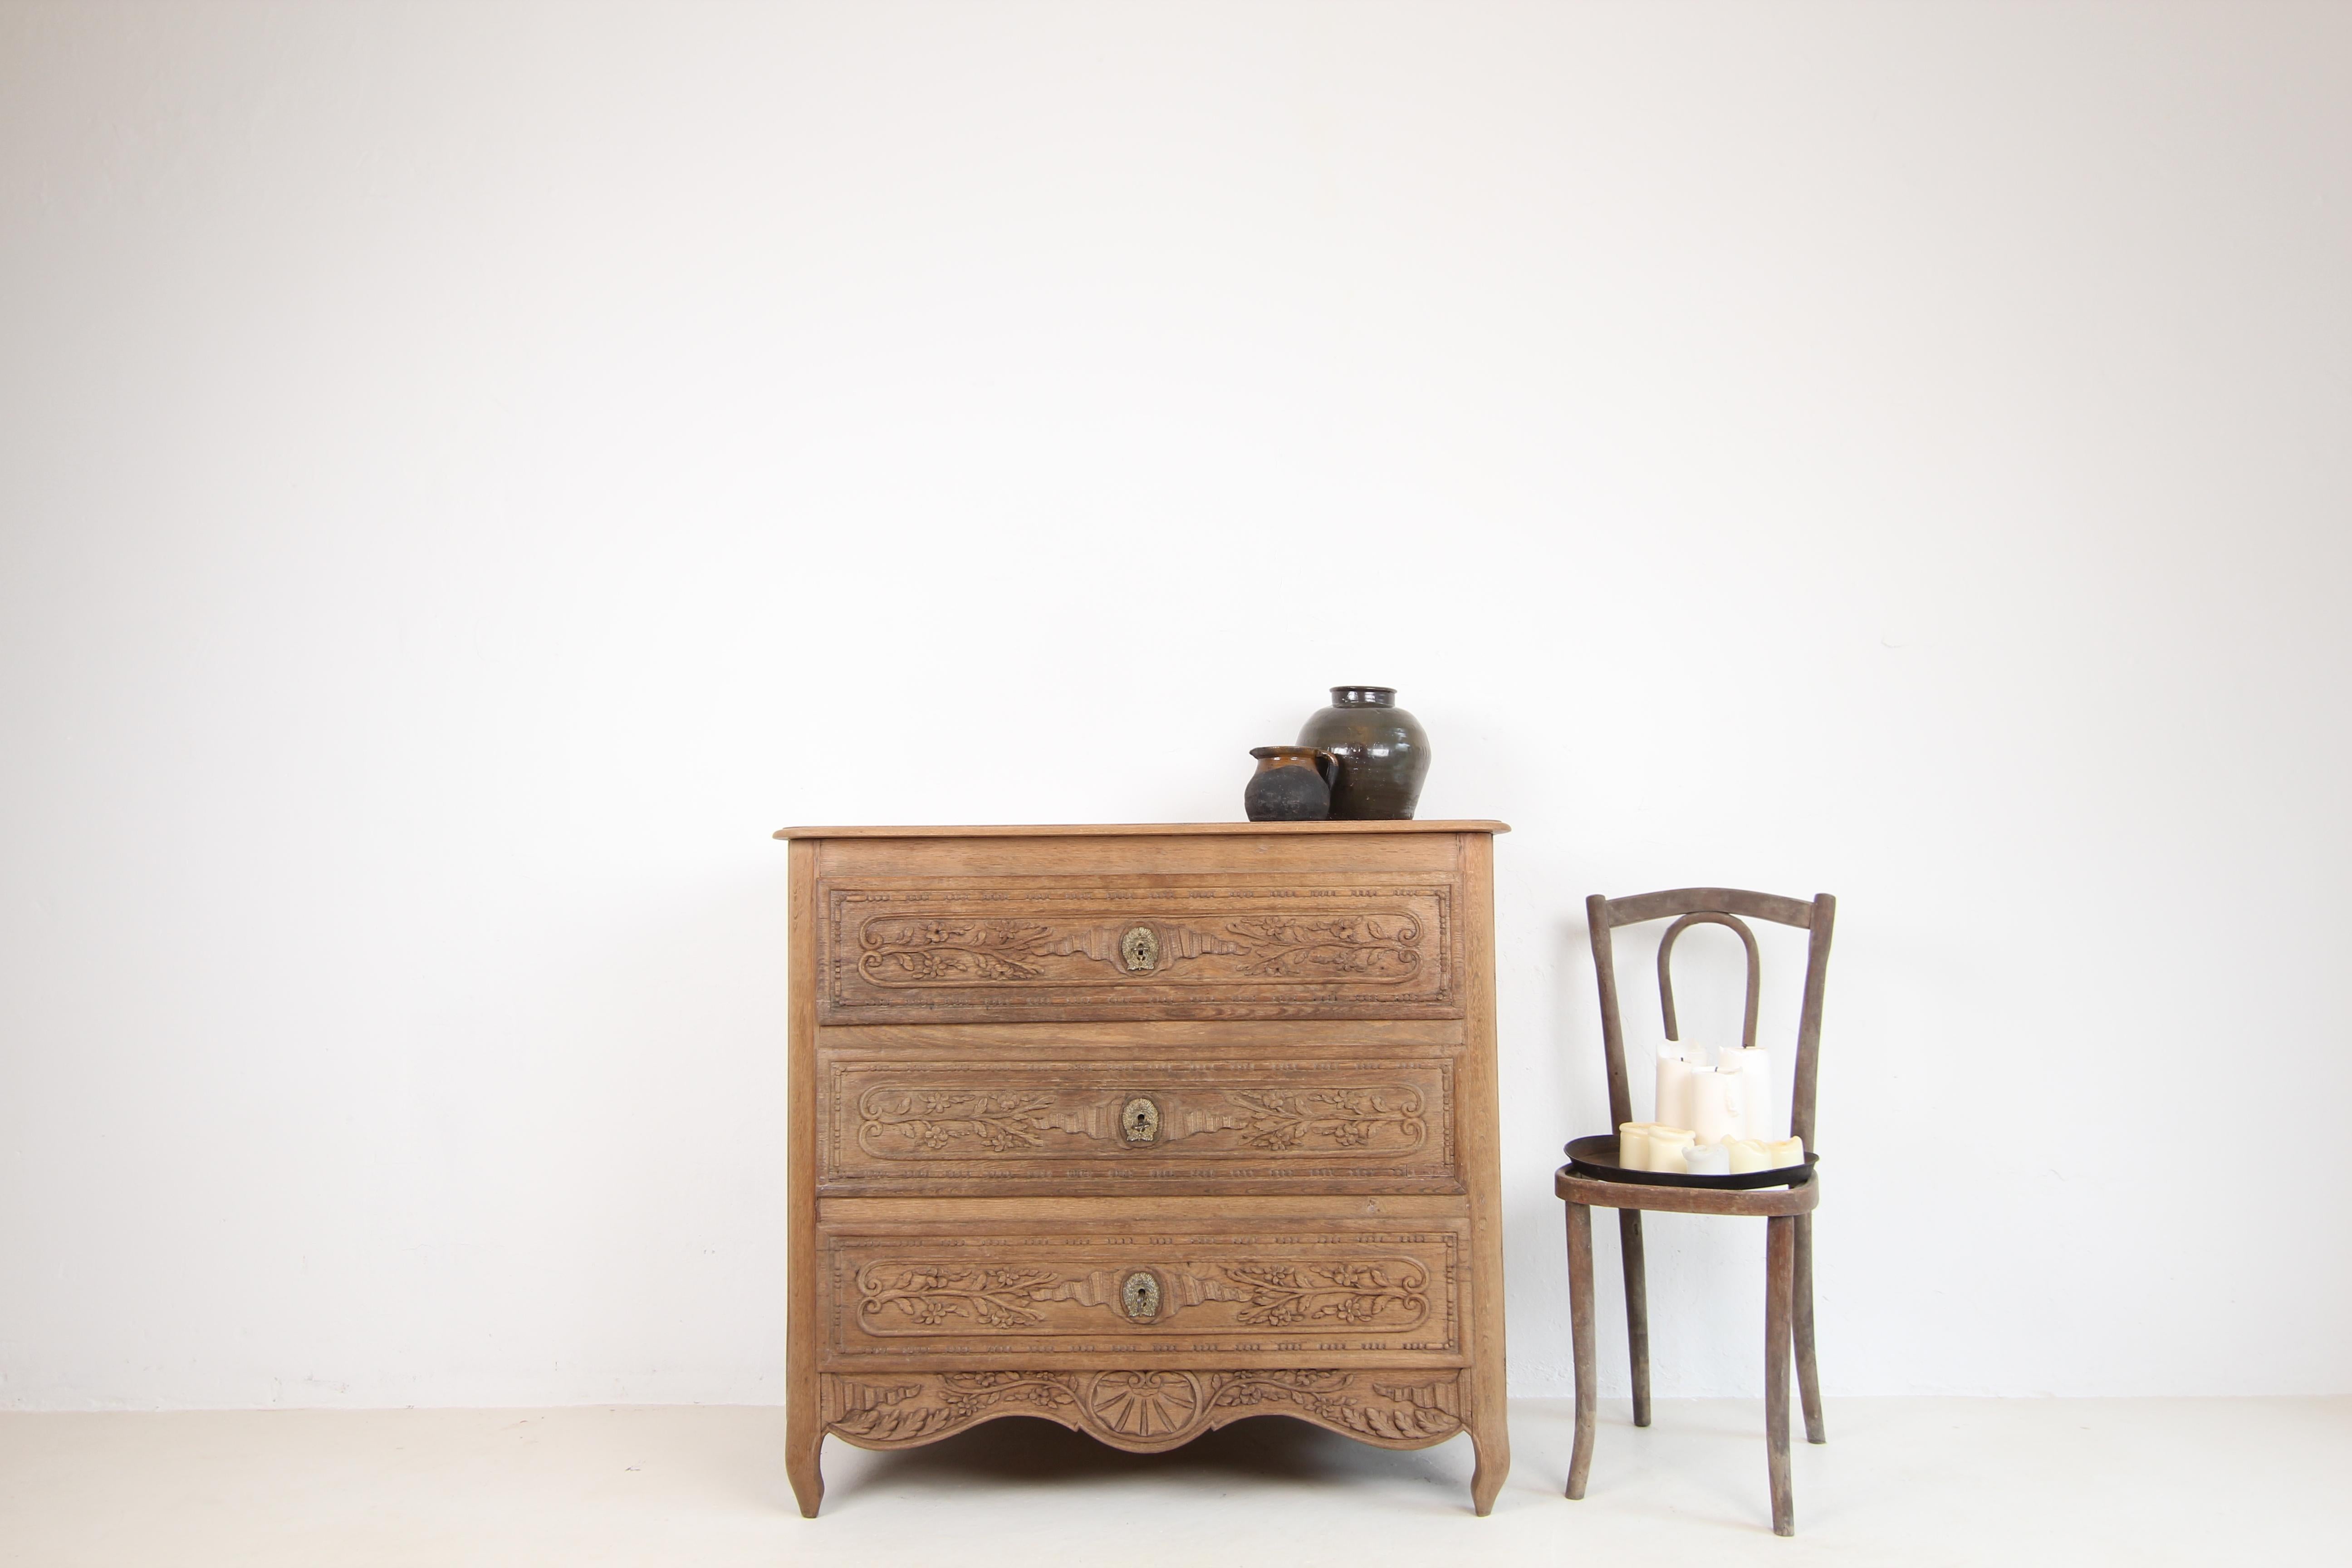 French chest of drawers from around 1900. Made of oak. 

A three-drawer oak body with coffered sides, slightly protruding moulded top panel and rounded corners ending in slightly curved S-shaped feet. Florally and ornamentally carved drawer fronts